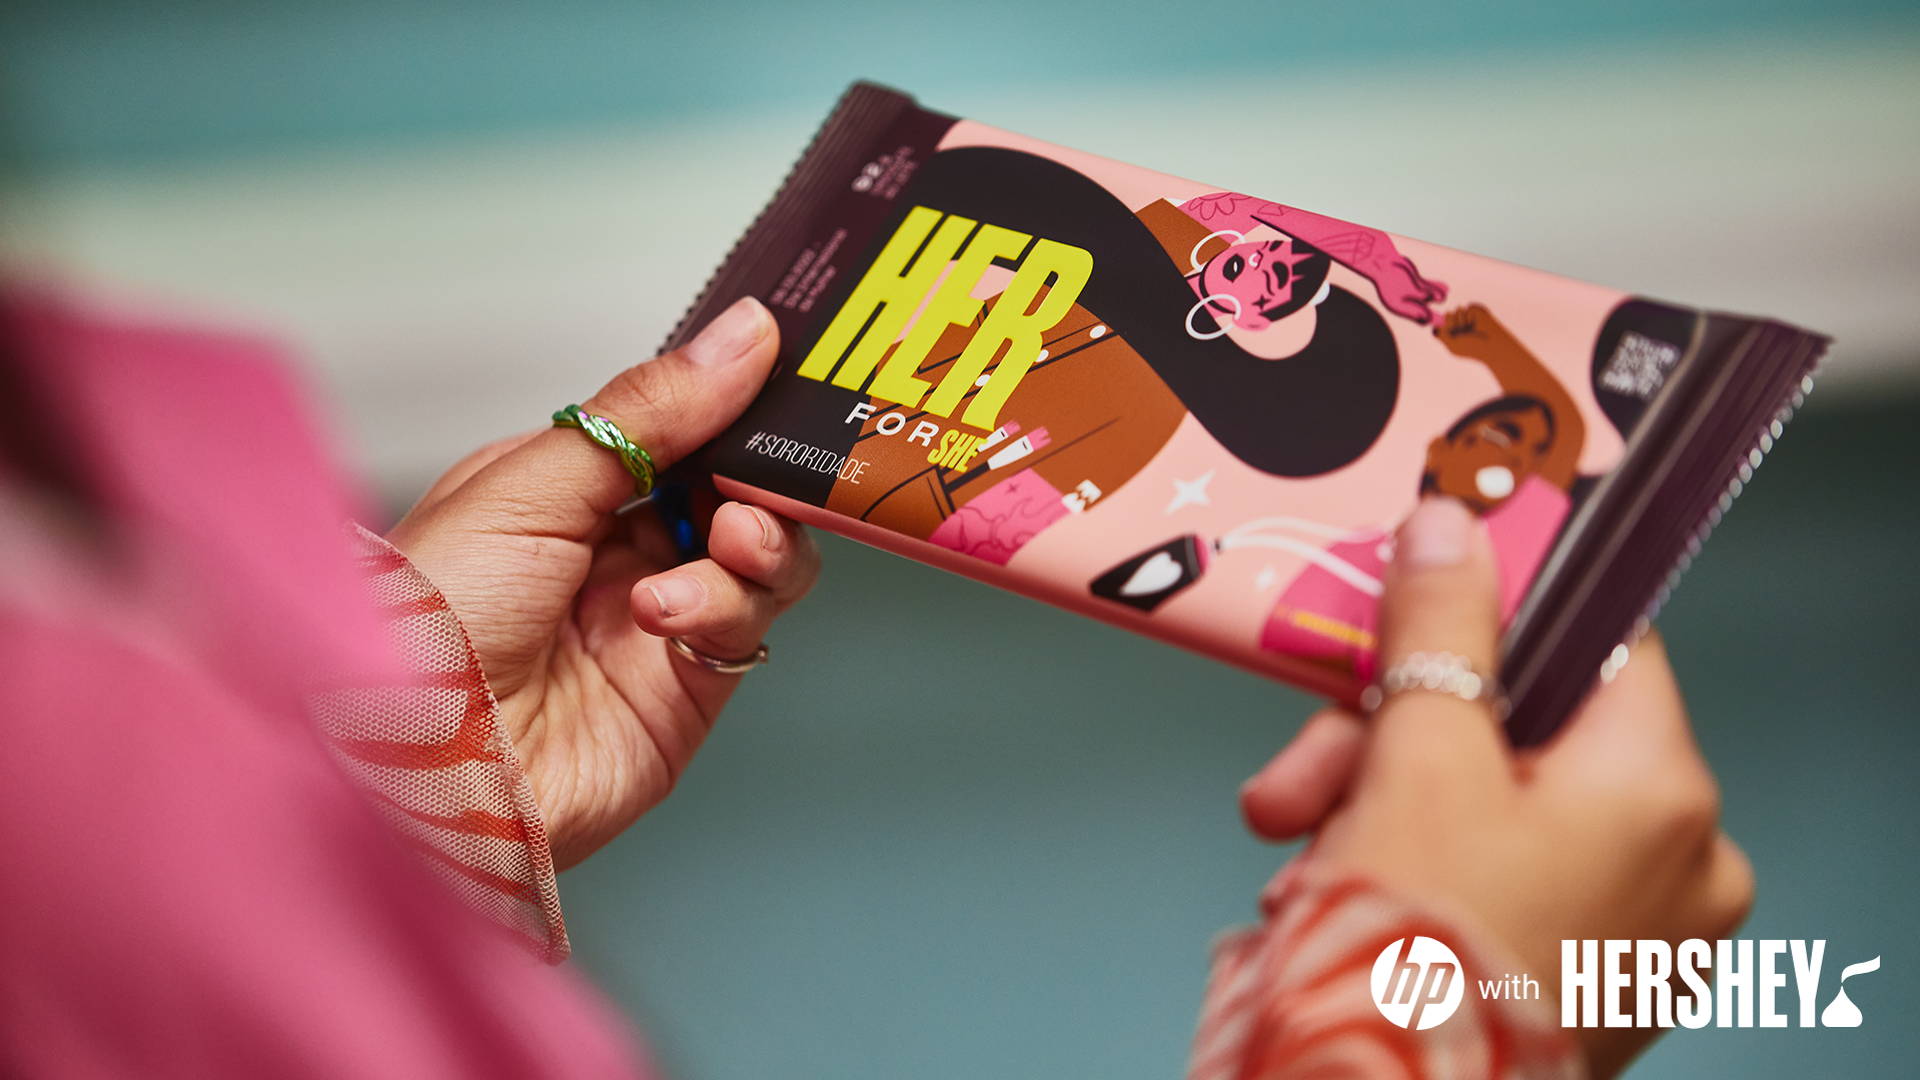 Featured image for Can a Candy Bar Tell a Story? Hershey and HP Indigo Say Yes With Latest #HerForShe Campaign